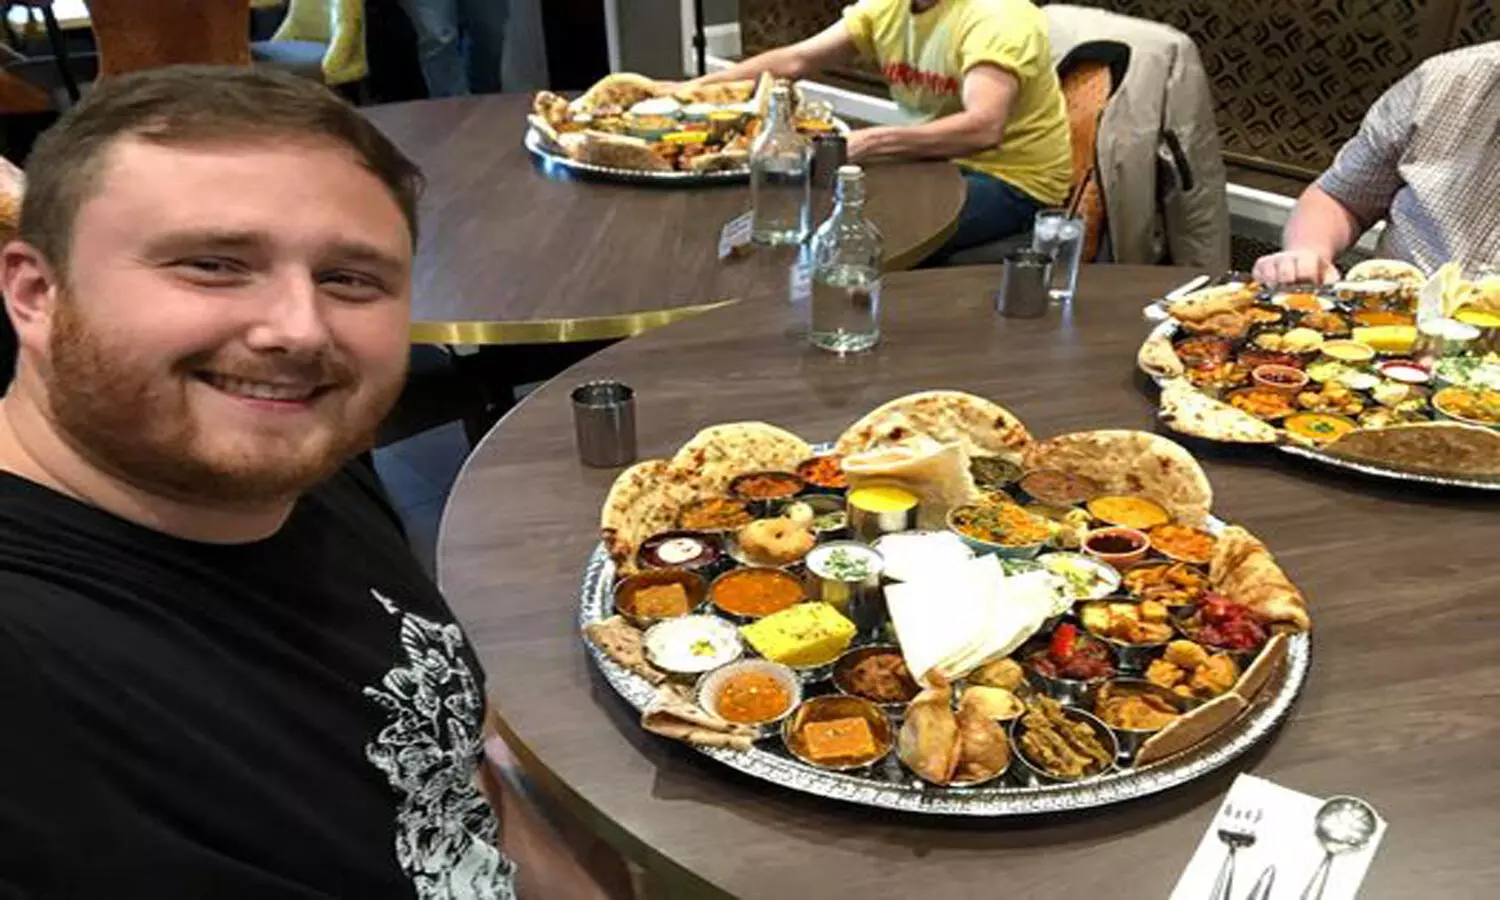 This Indian restaurant in UK sets up an almost impossible task: Finish a 7kg thali in 1 hour